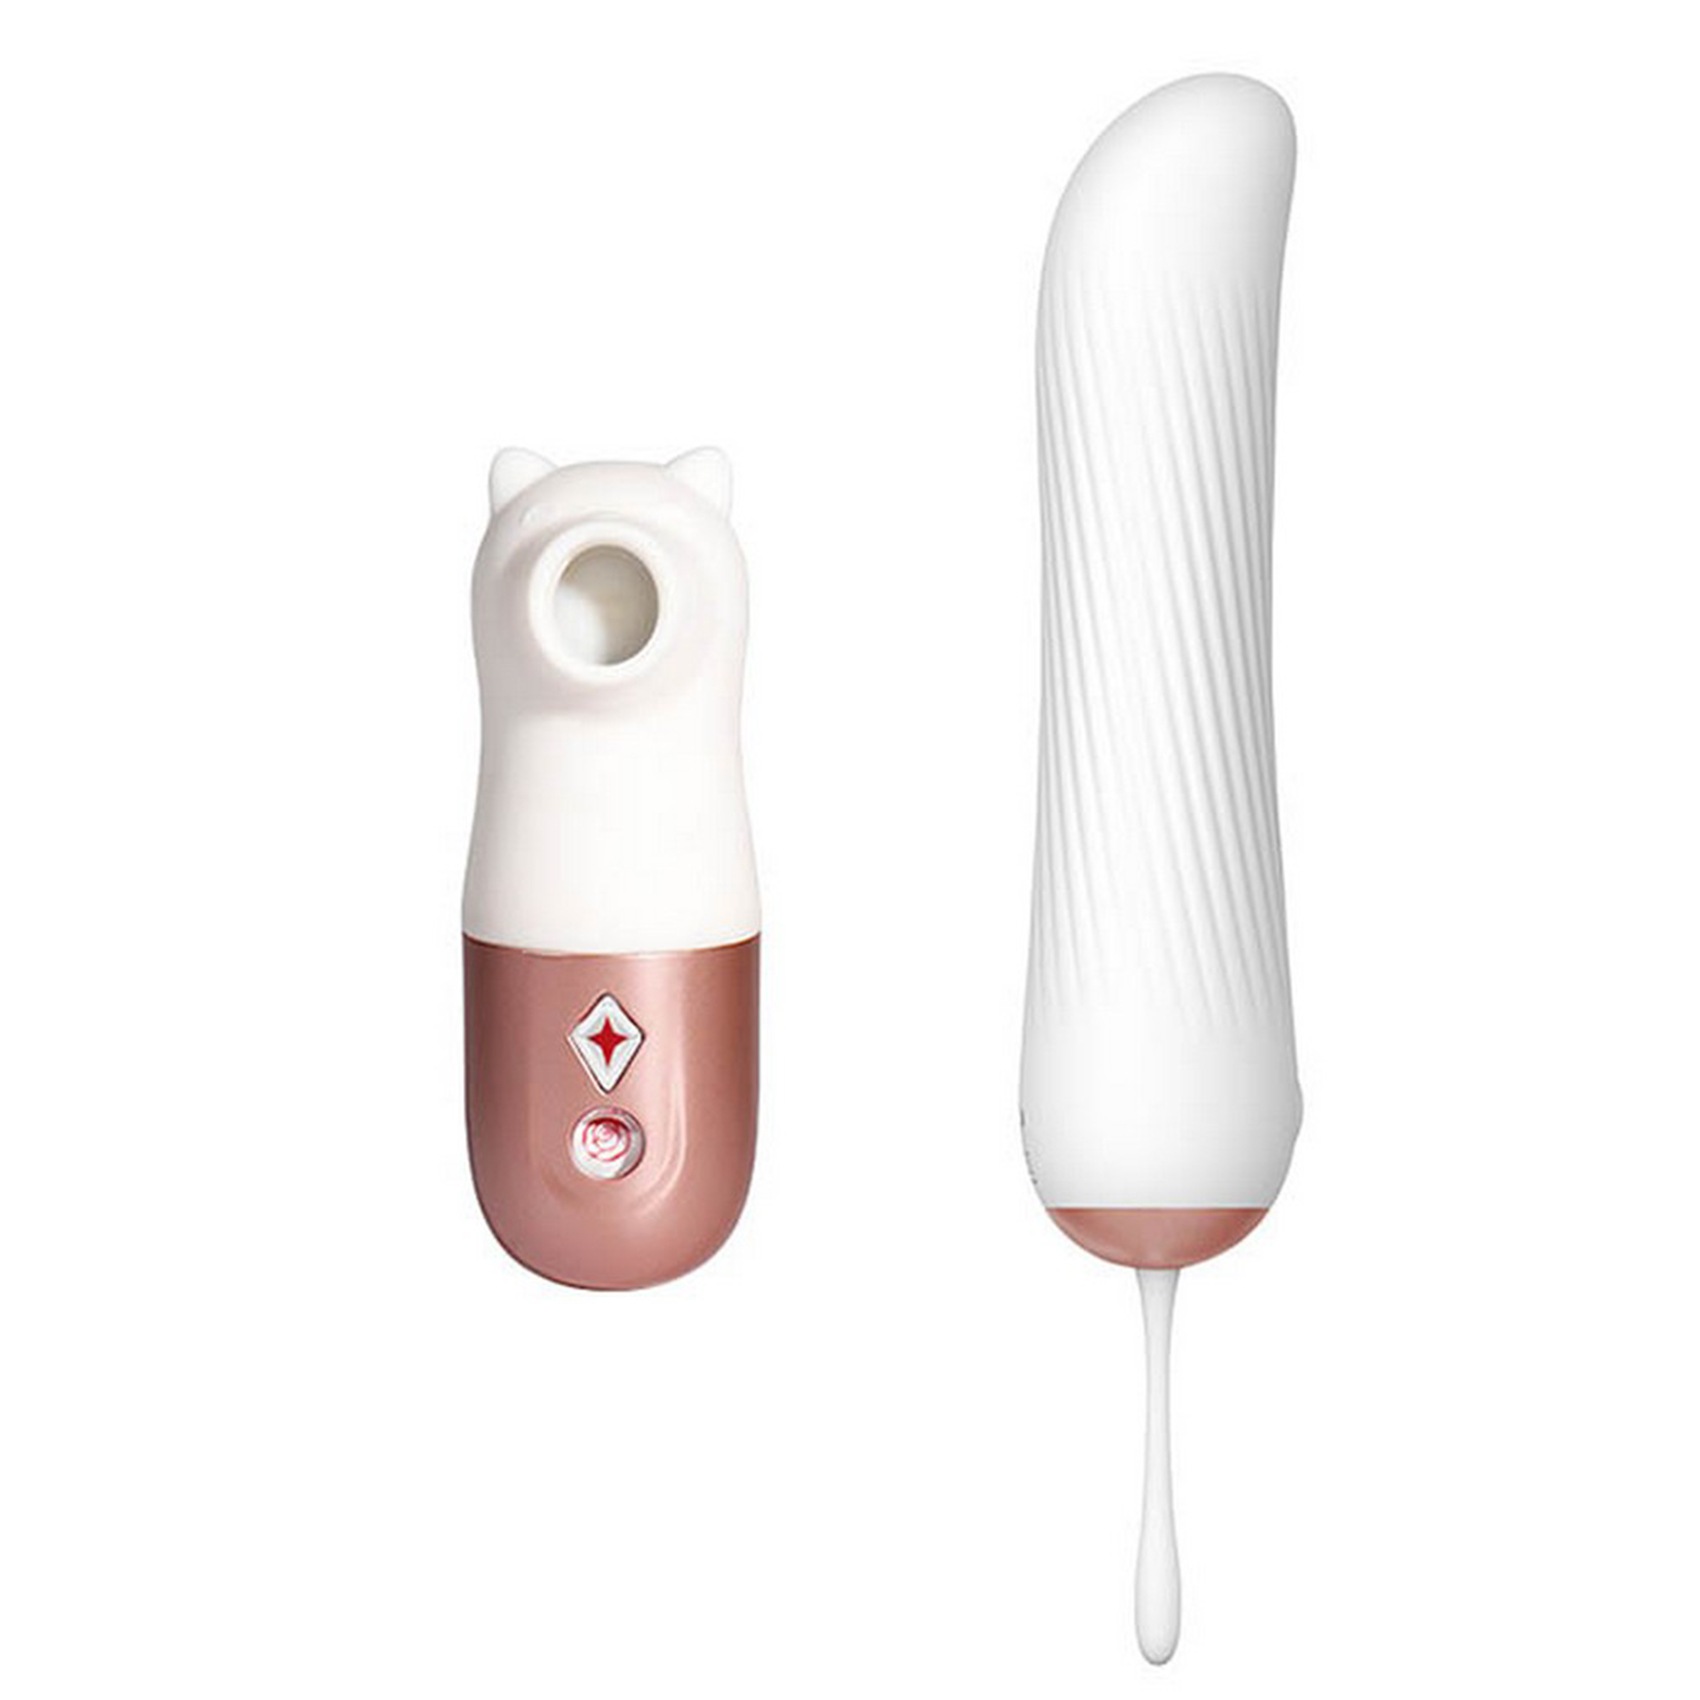 Winner Remote Control Sucking Vibrator Set with Wand